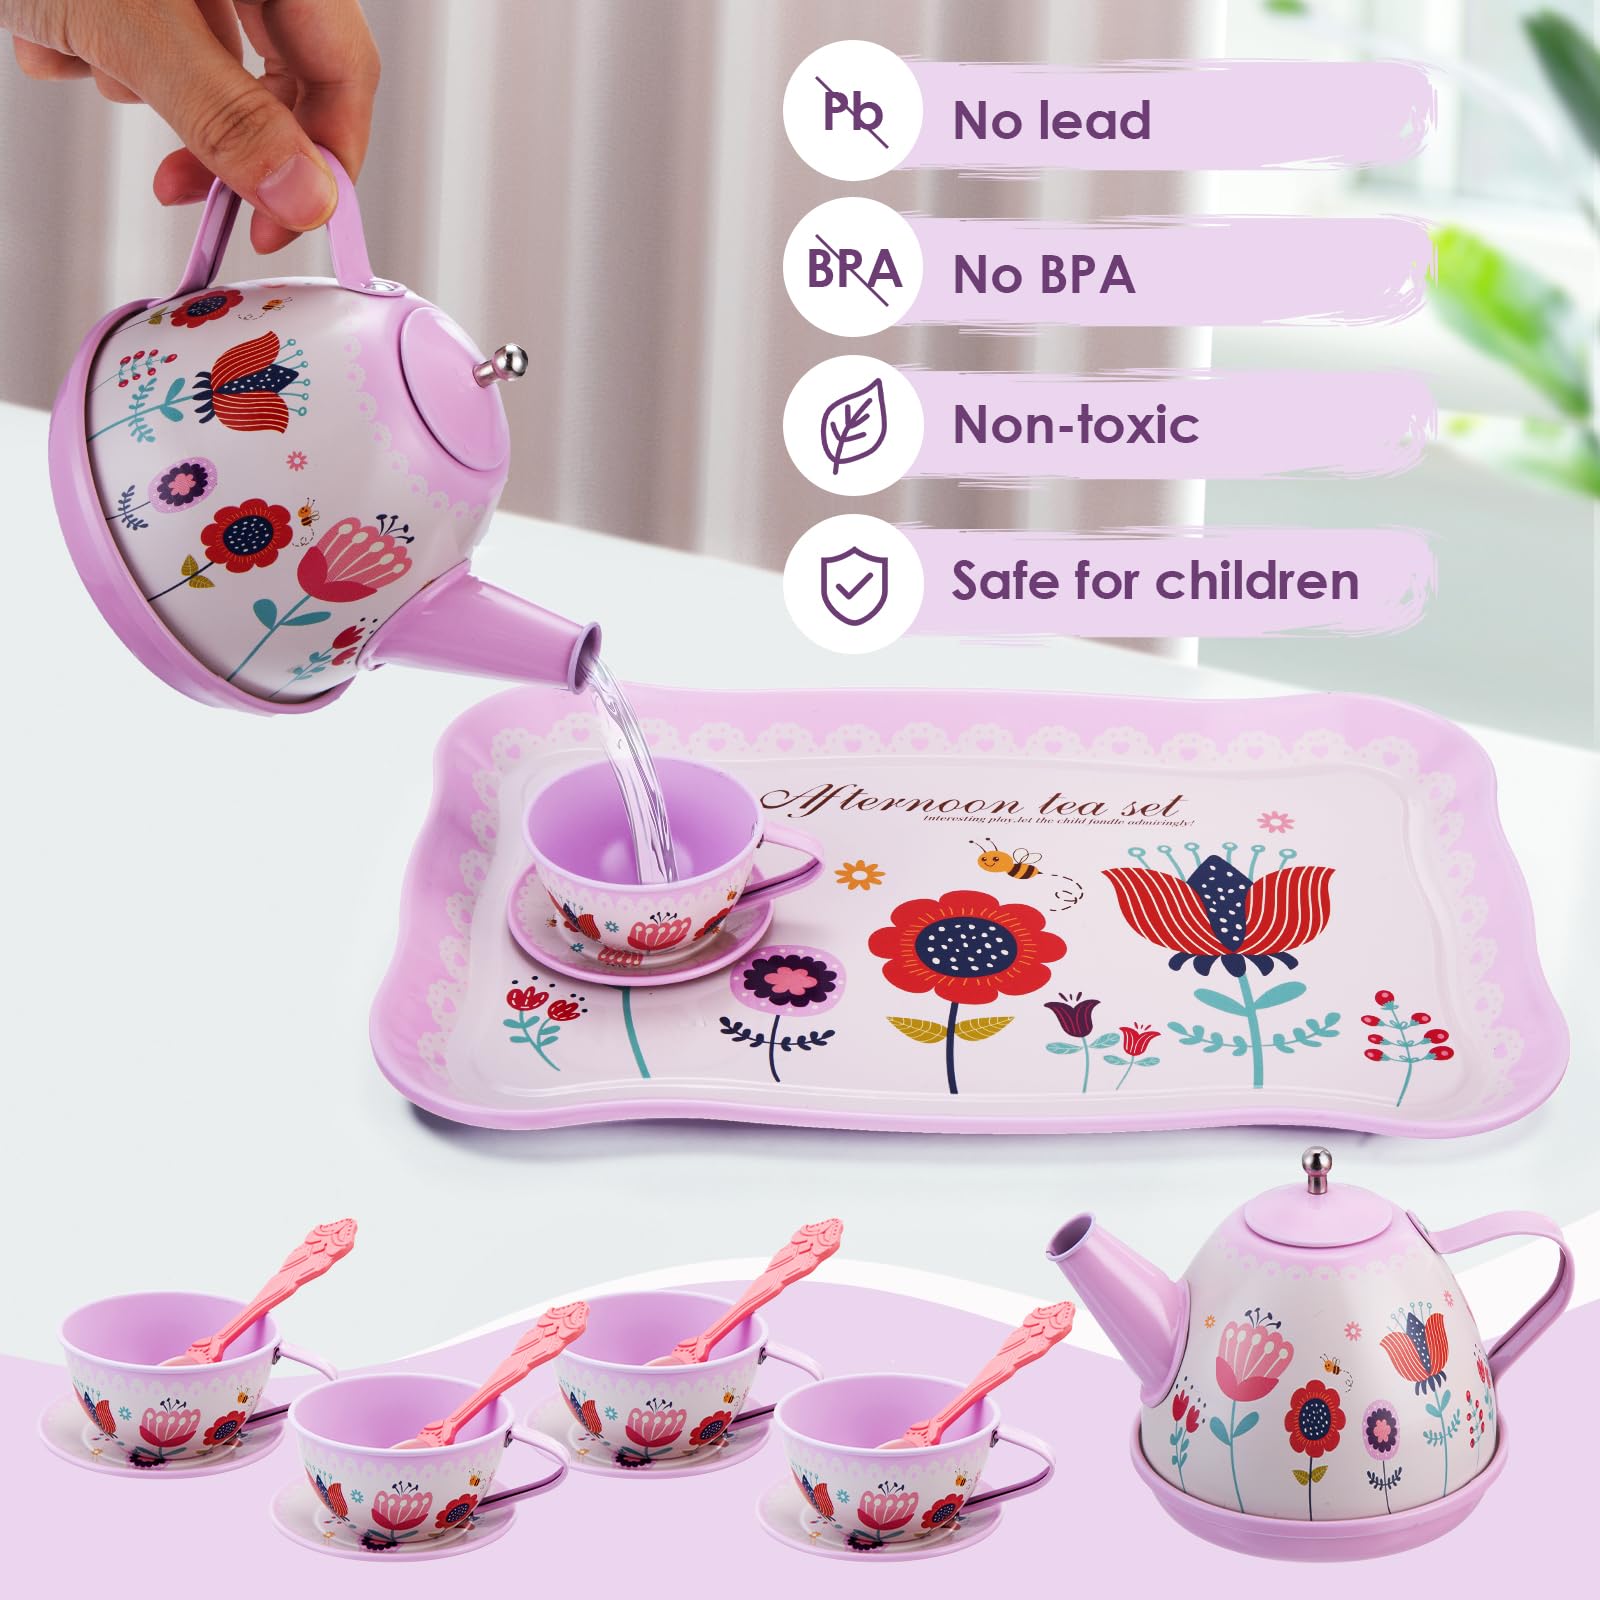 MAMPO 46PCS Tea Set for Little Girls, Princess Tea Time Pretend Kitchen Toy with Biscuits, Teapot, Cake, Dessert, Carrying Case, Donut for Kids Girls Boys